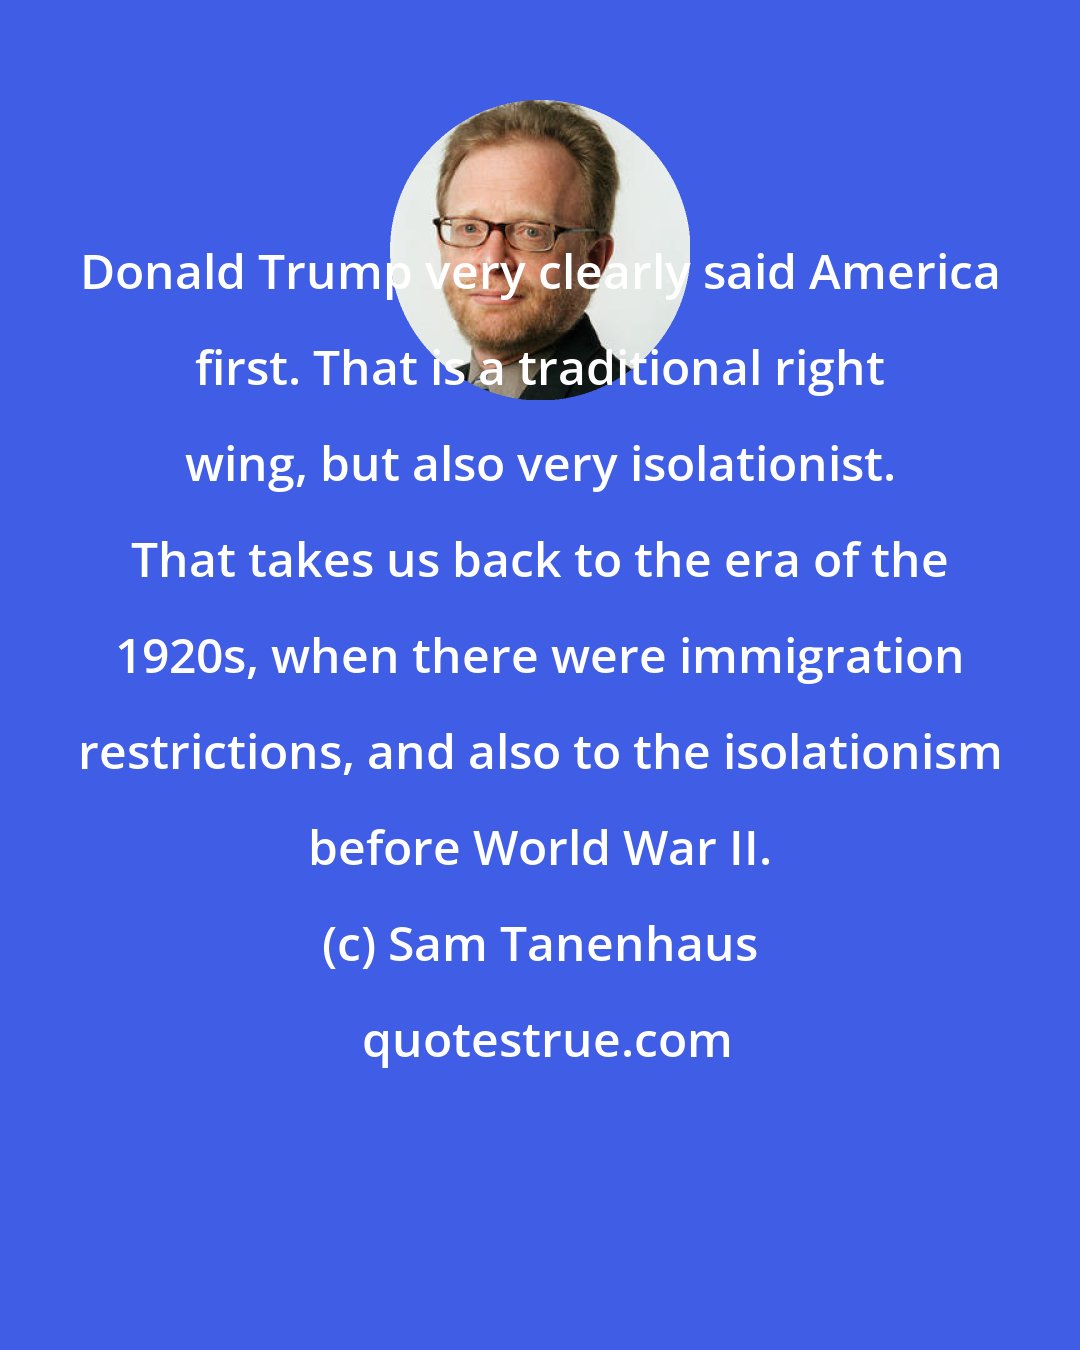 Sam Tanenhaus: Donald Trump very clearly said America first. That is a traditional right wing, but also very isolationist. That takes us back to the era of the 1920s, when there were immigration restrictions, and also to the isolationism before World War II.